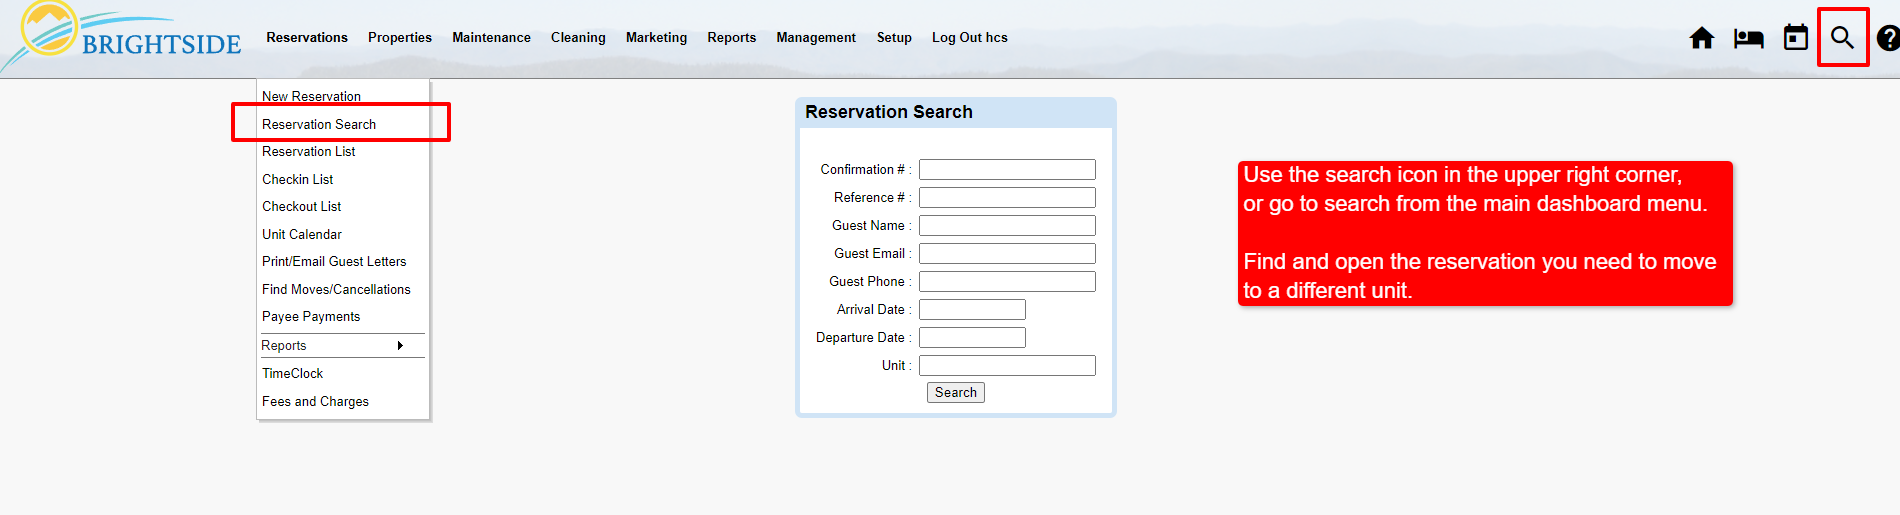 Image with details for how to search for a reservation